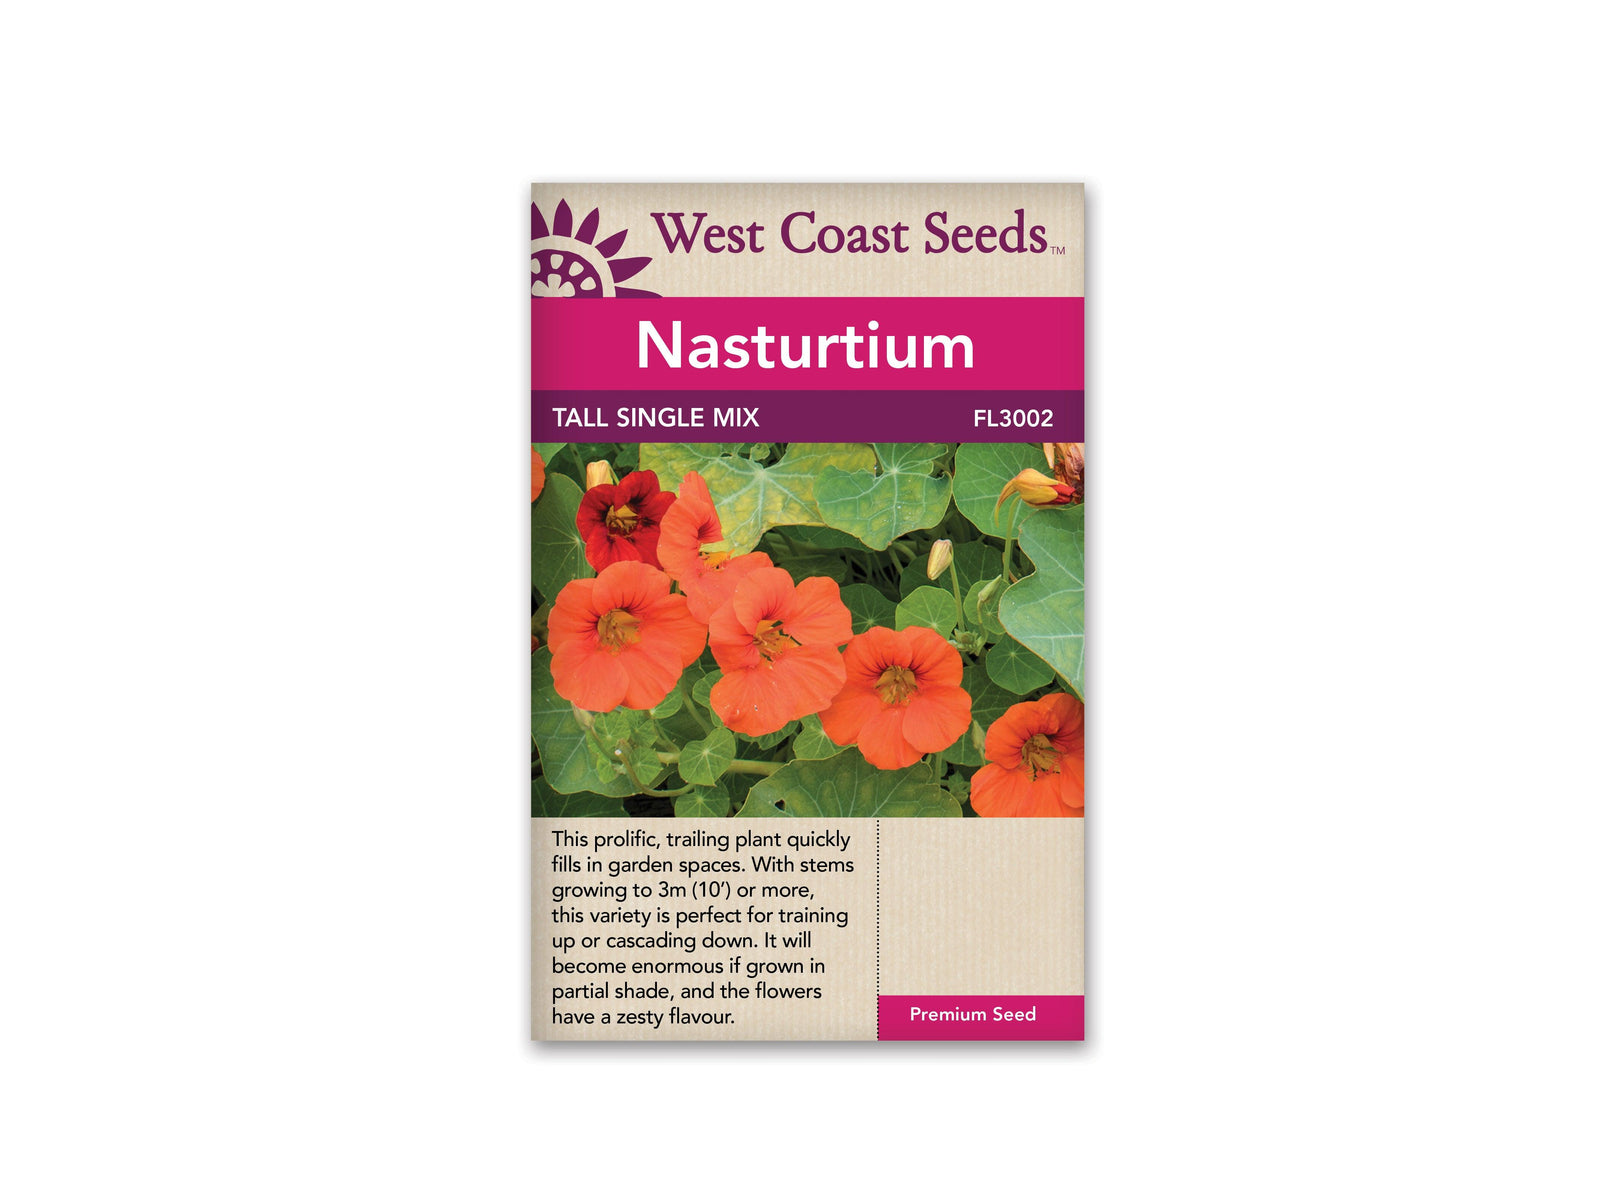 Add cheer to your garden with Nasturtiums Tall Single Mix. These lively, trailing plants thrive in sun or shade, and can reach a height of 3m. They're perfect for filling gaps in fences, archways, and gardens, and they provide a stunning burst of color that will entice you and your guests. Enjoy the cheerful blossoms of Nasturtiums Tall Single Mix this season.